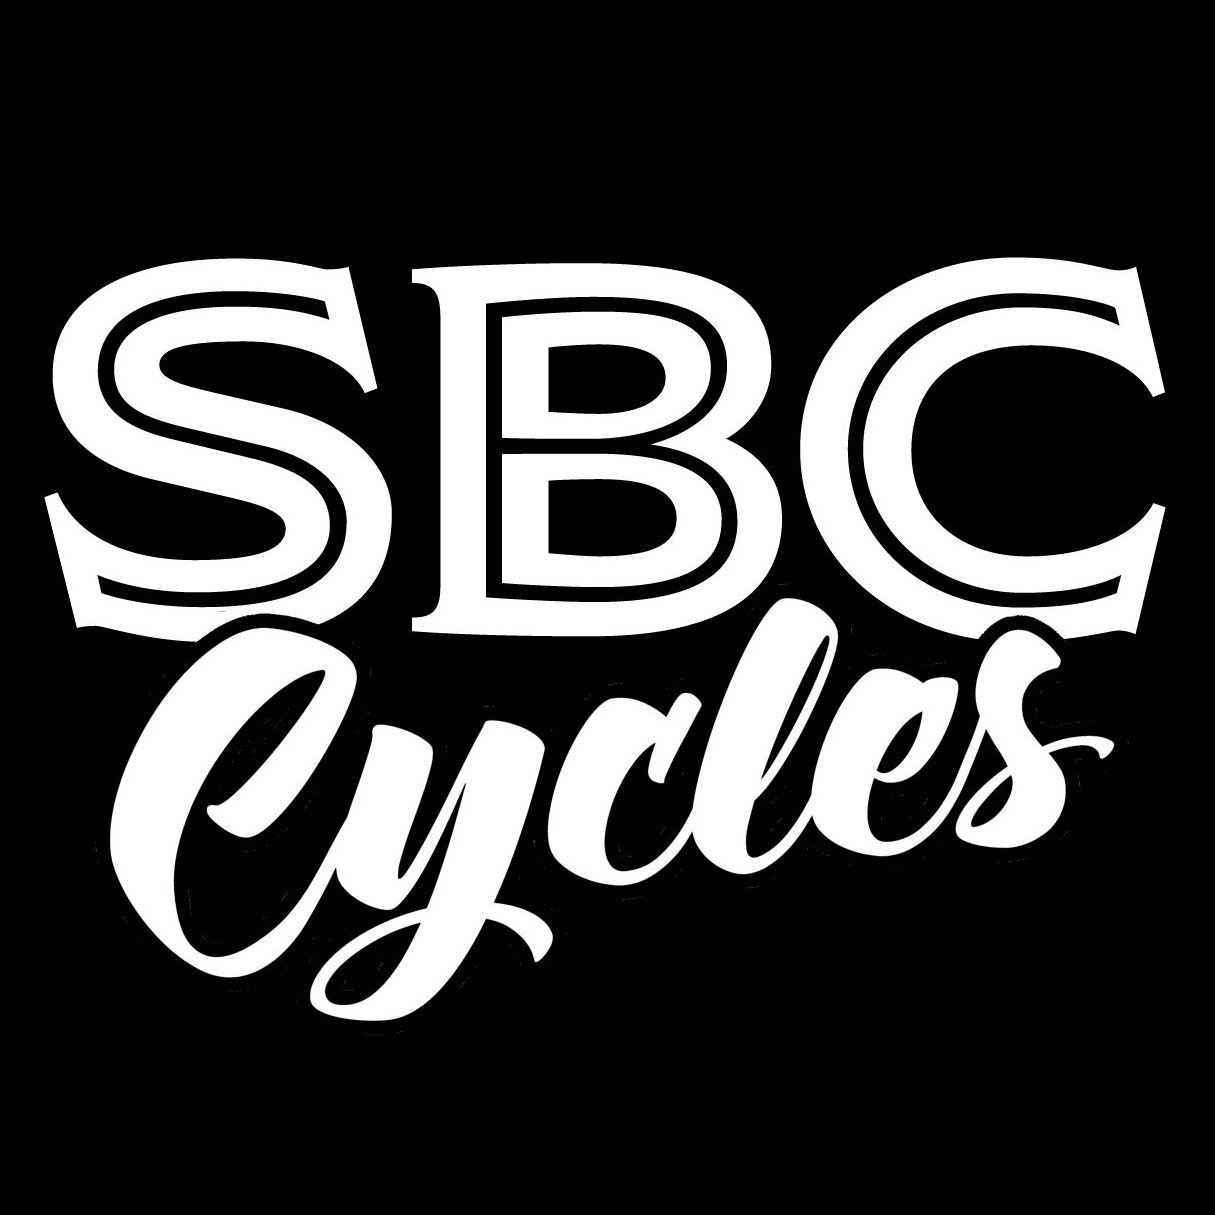 sbccycles